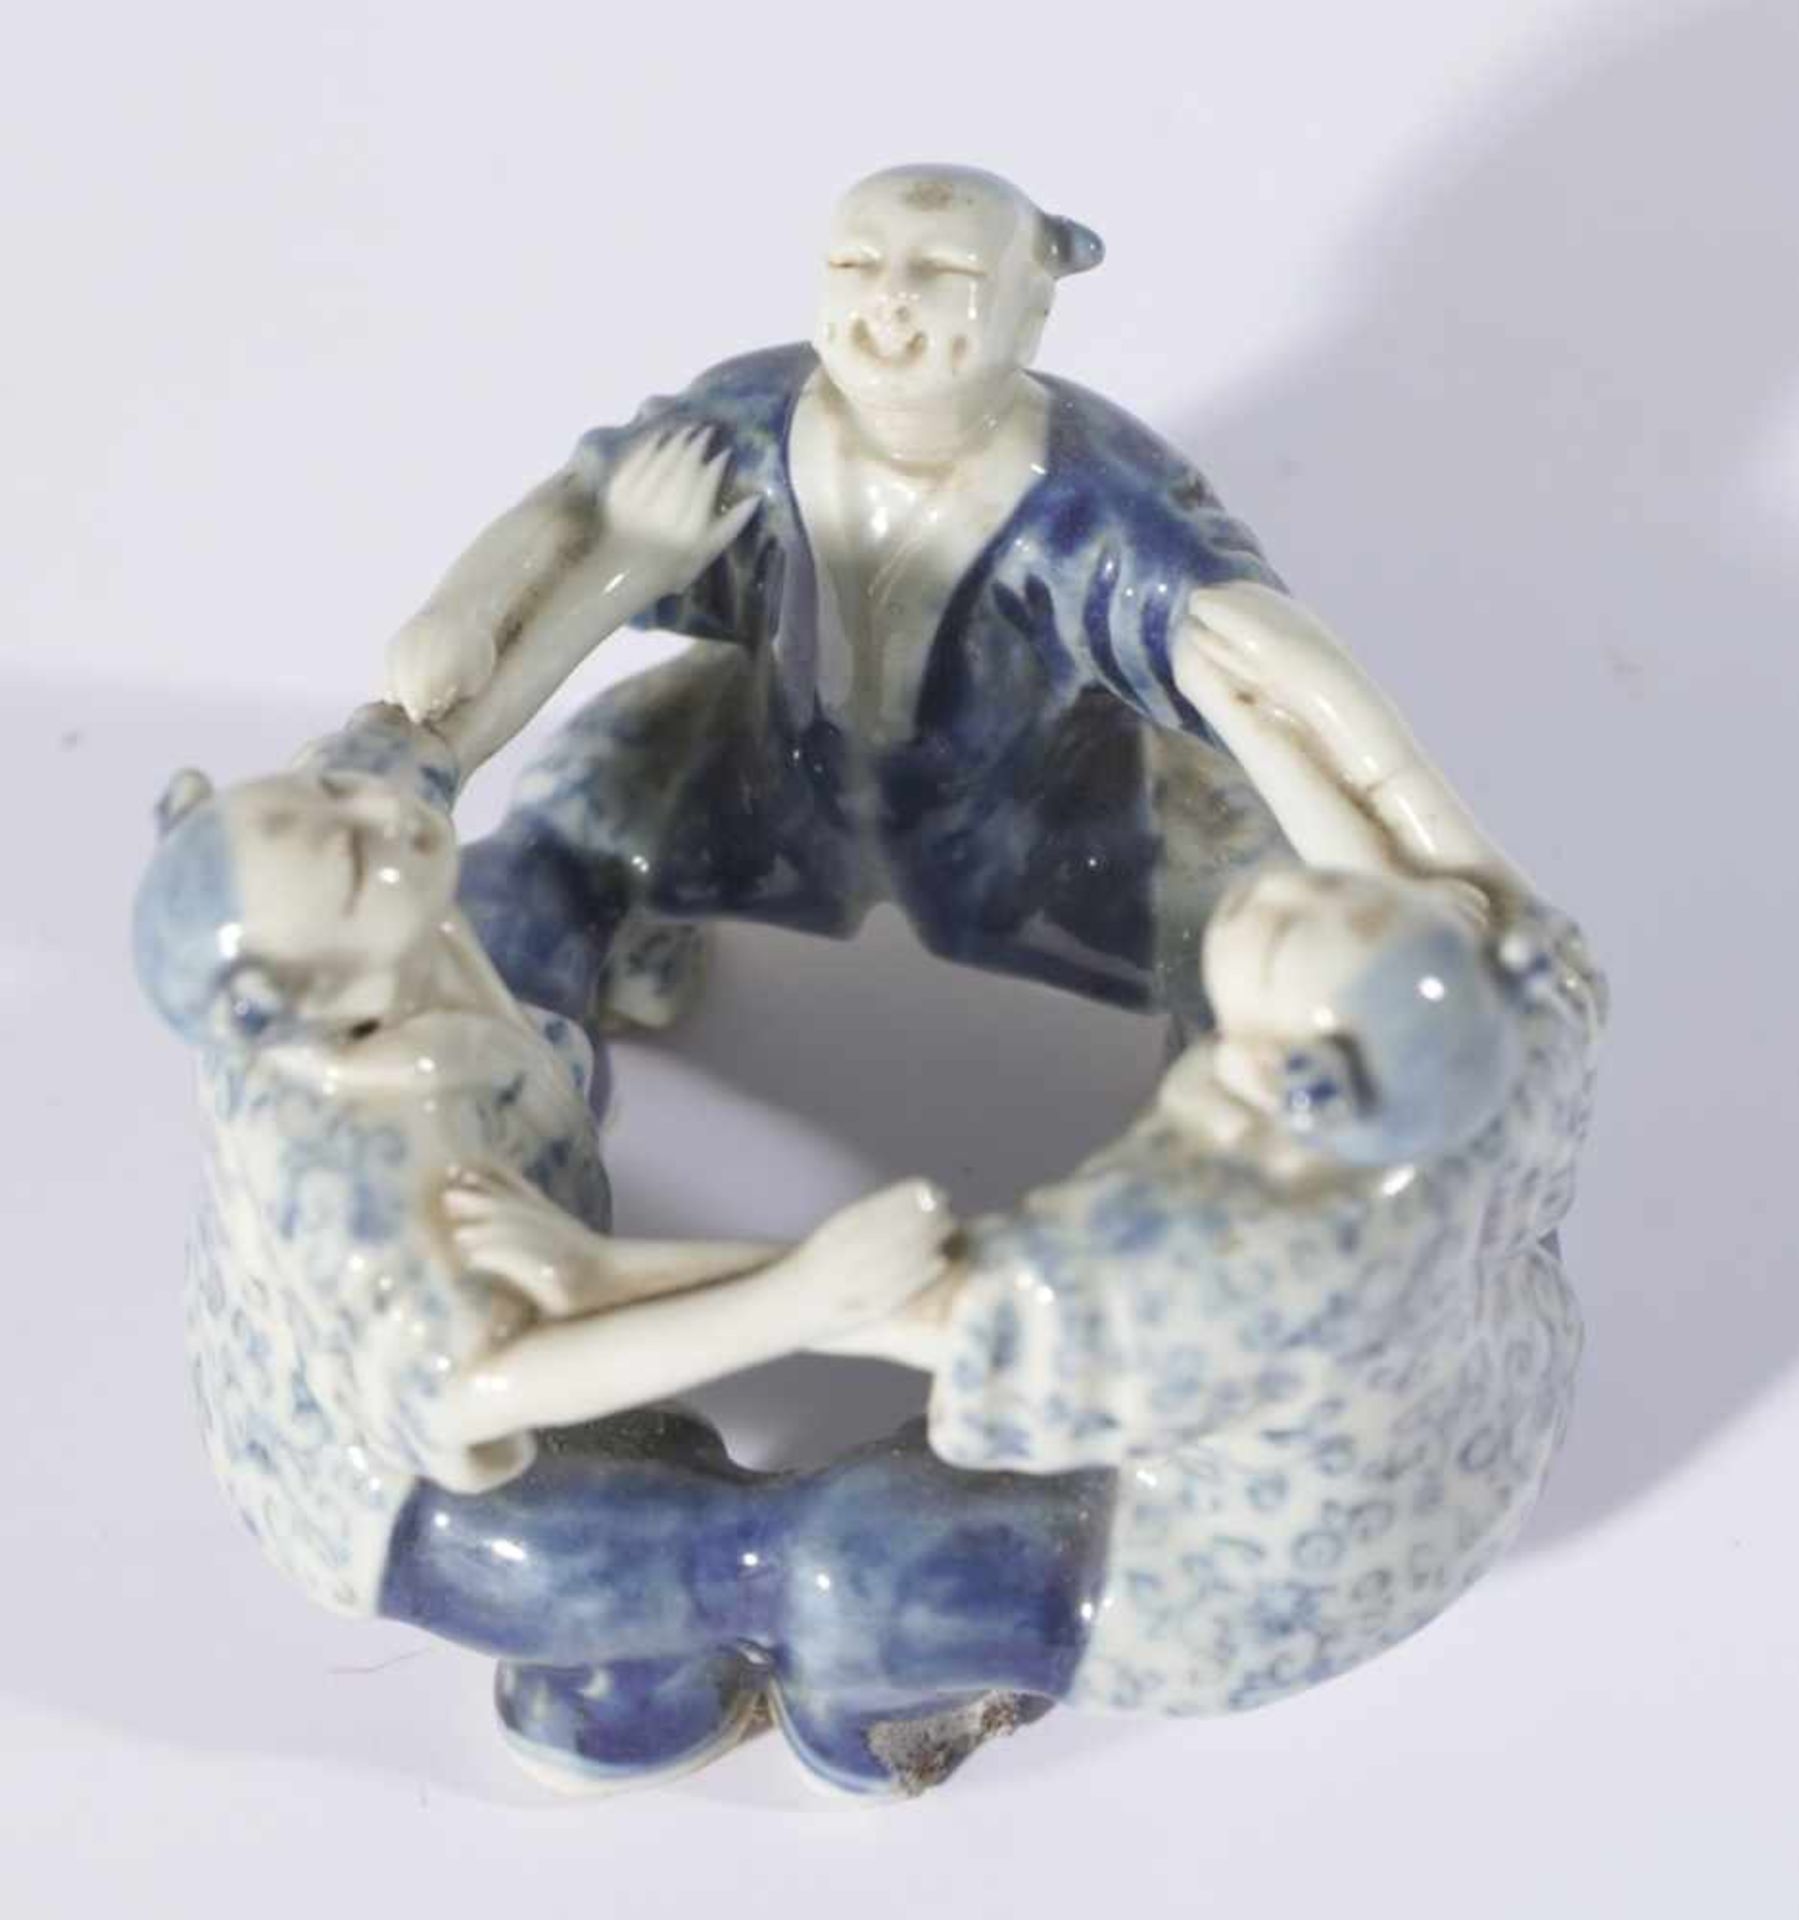 Dancing group of figures, China, Porcelain, end of 19th c., 6 x 7 cm, Provenance: Private